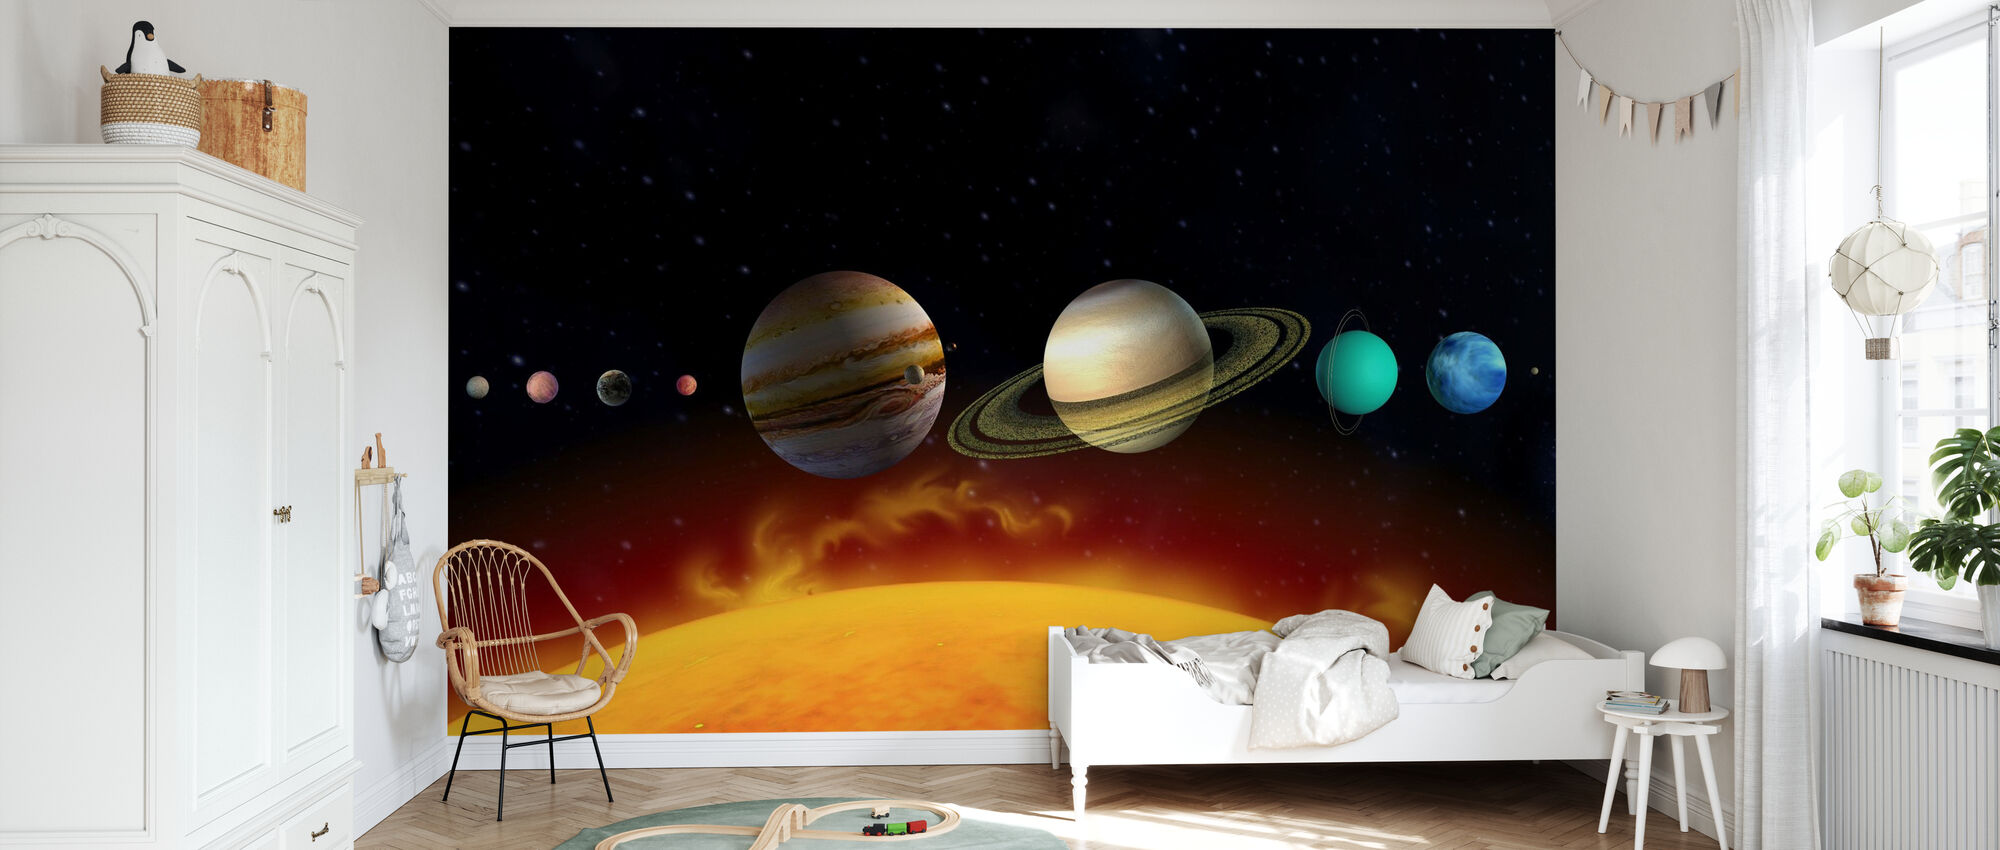 Sun and planets â remarkable wall mural â